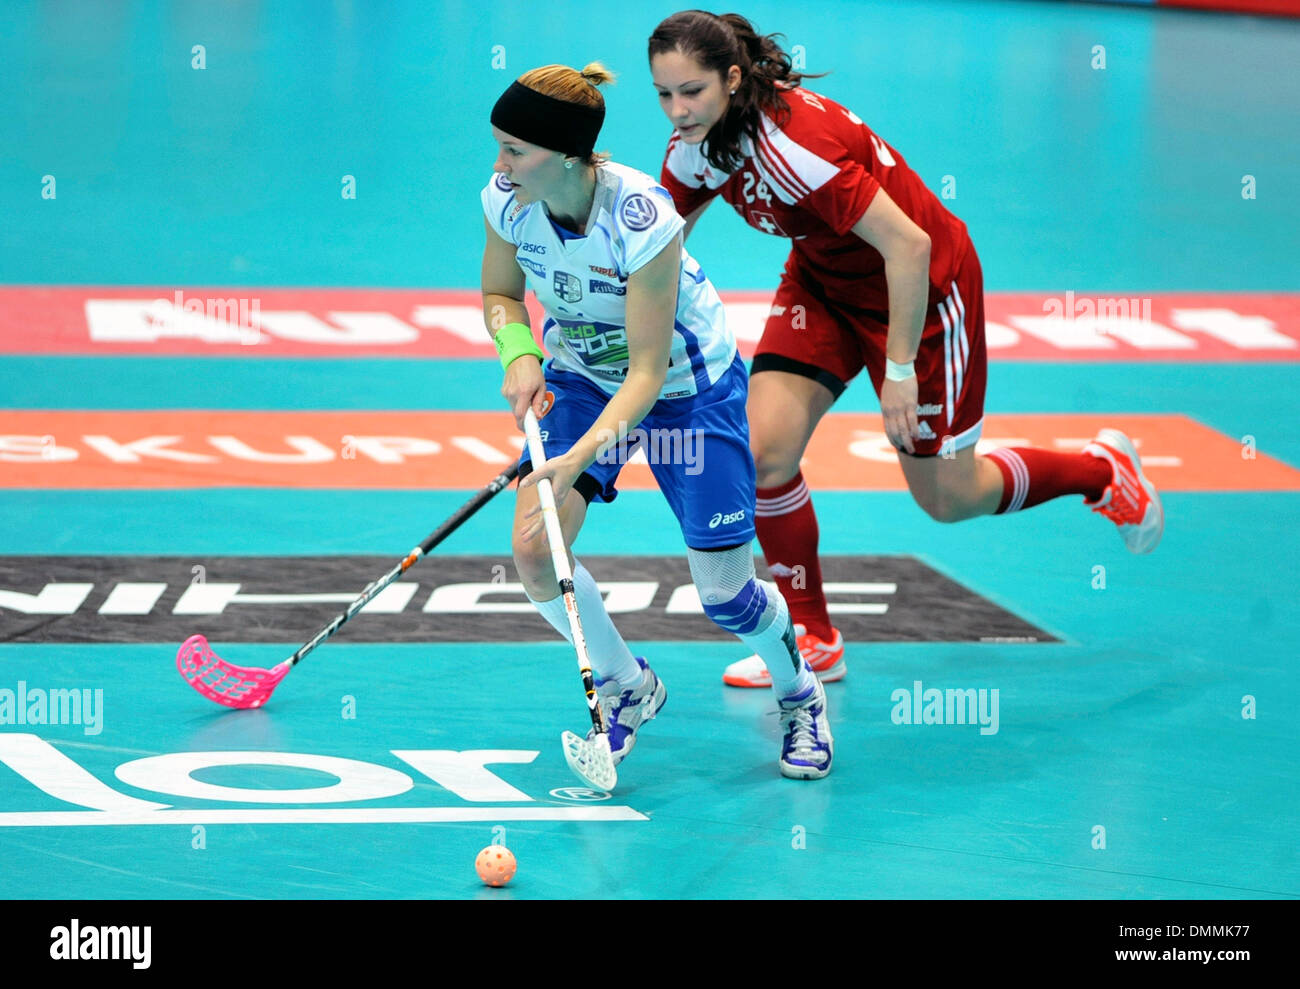 Ostrava, Czech Rep. 14th Dec, 2013. Katri Luomaniemi, left, of Finland  fights for the ball with Flurina Marti, right, of Switzerland during their  Women's Floorball World Championship semifinal match in Ostrava, Czech